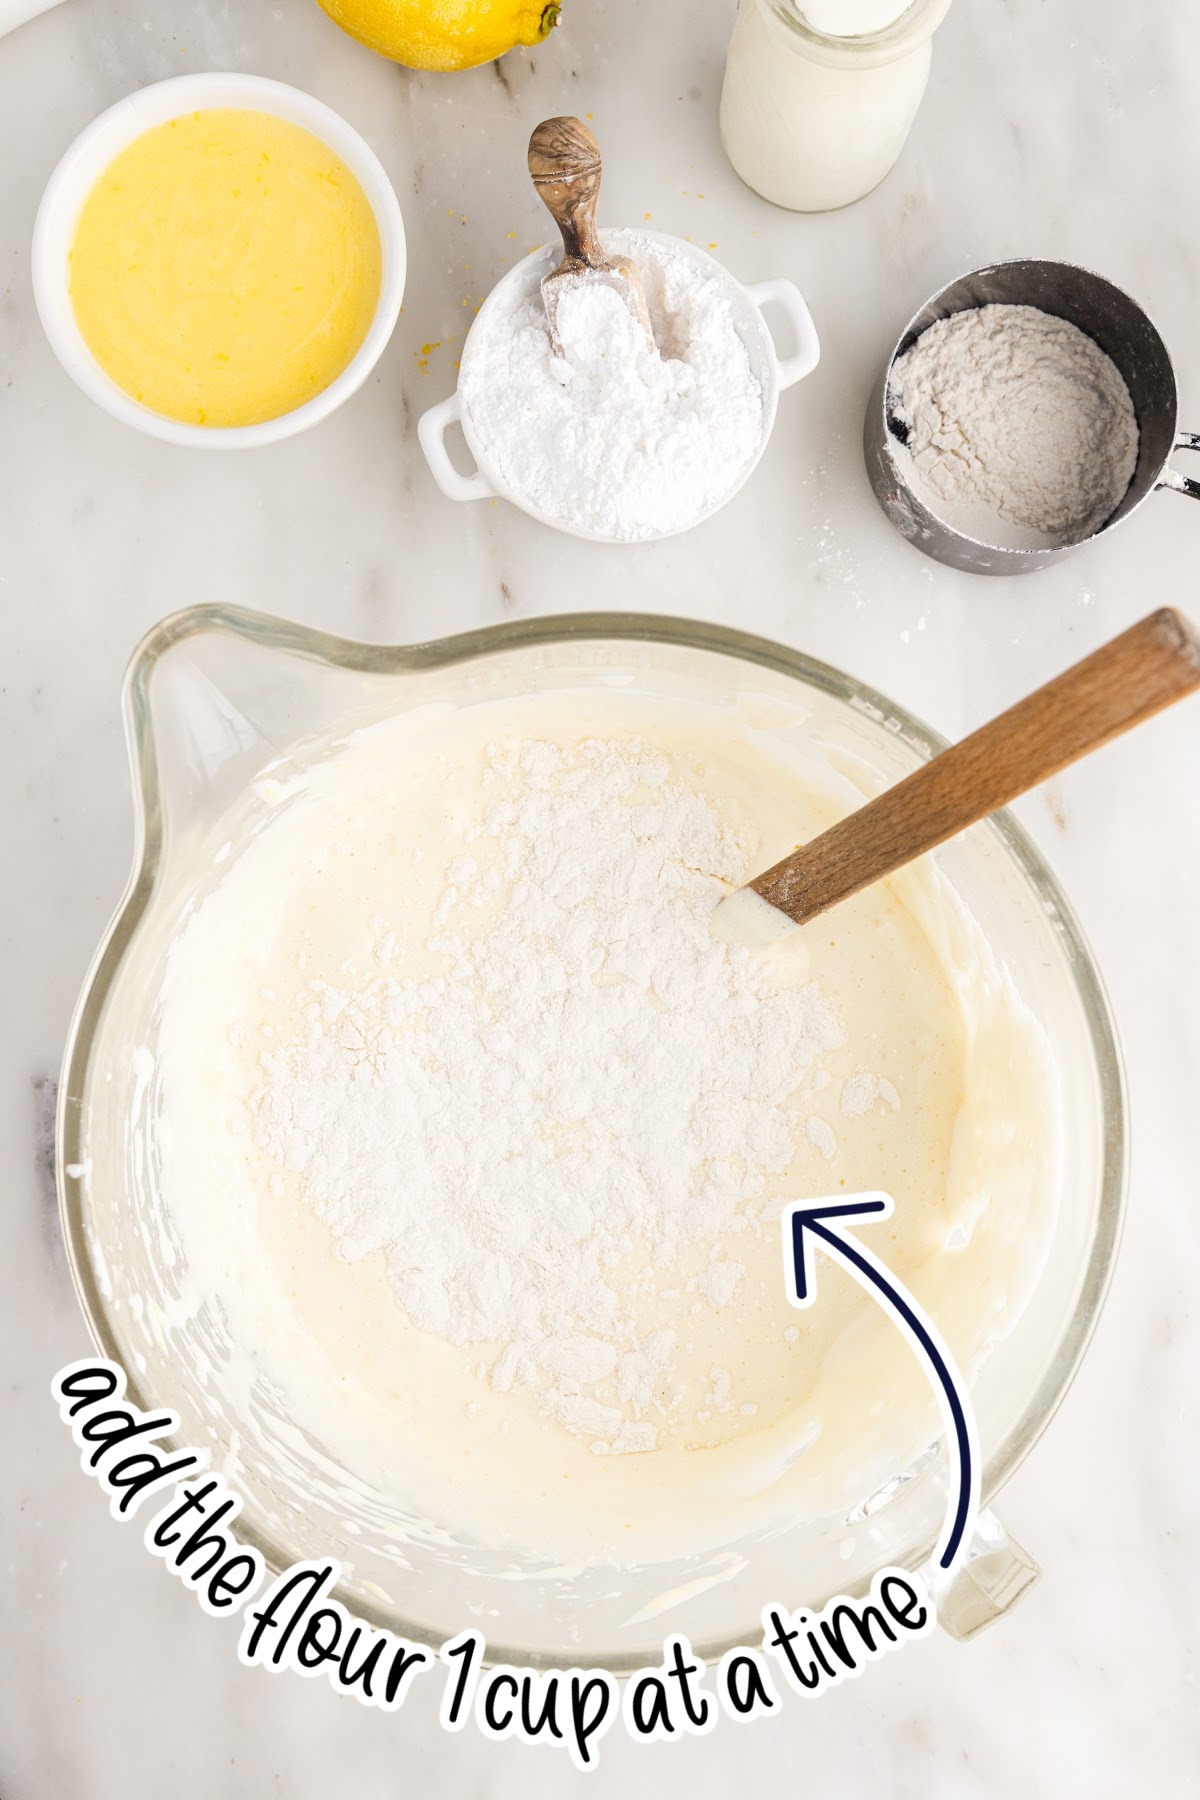 Flour added to the egg mixture in a mixing bowl with a spatula inserted with text overlay.